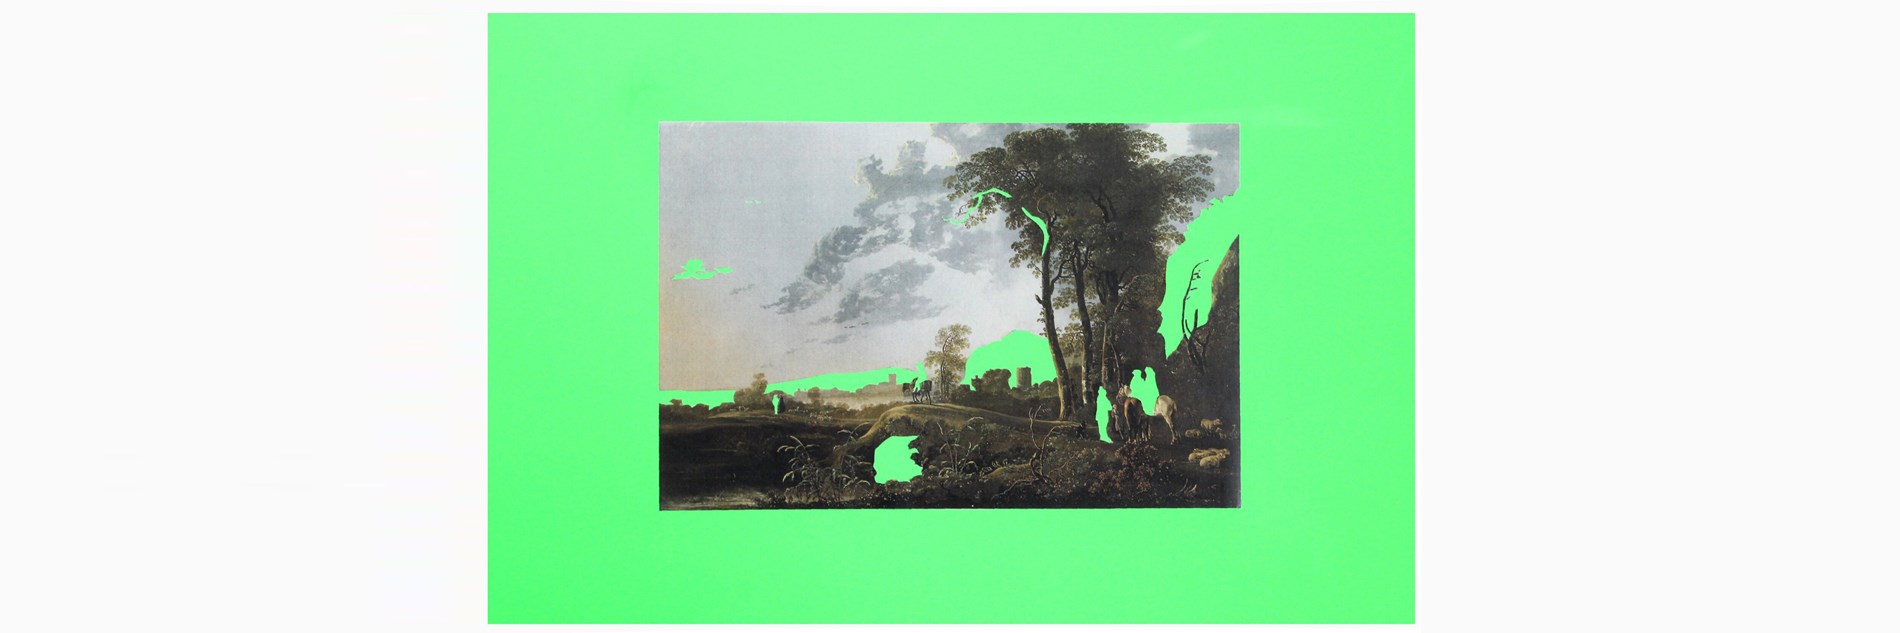 A traditional landscape painting with trees, figures on horseback and grey skies. There is a large tree to the right. The image has been digitally altered and features bright green accents. There is a bright green mount framing the landscape.